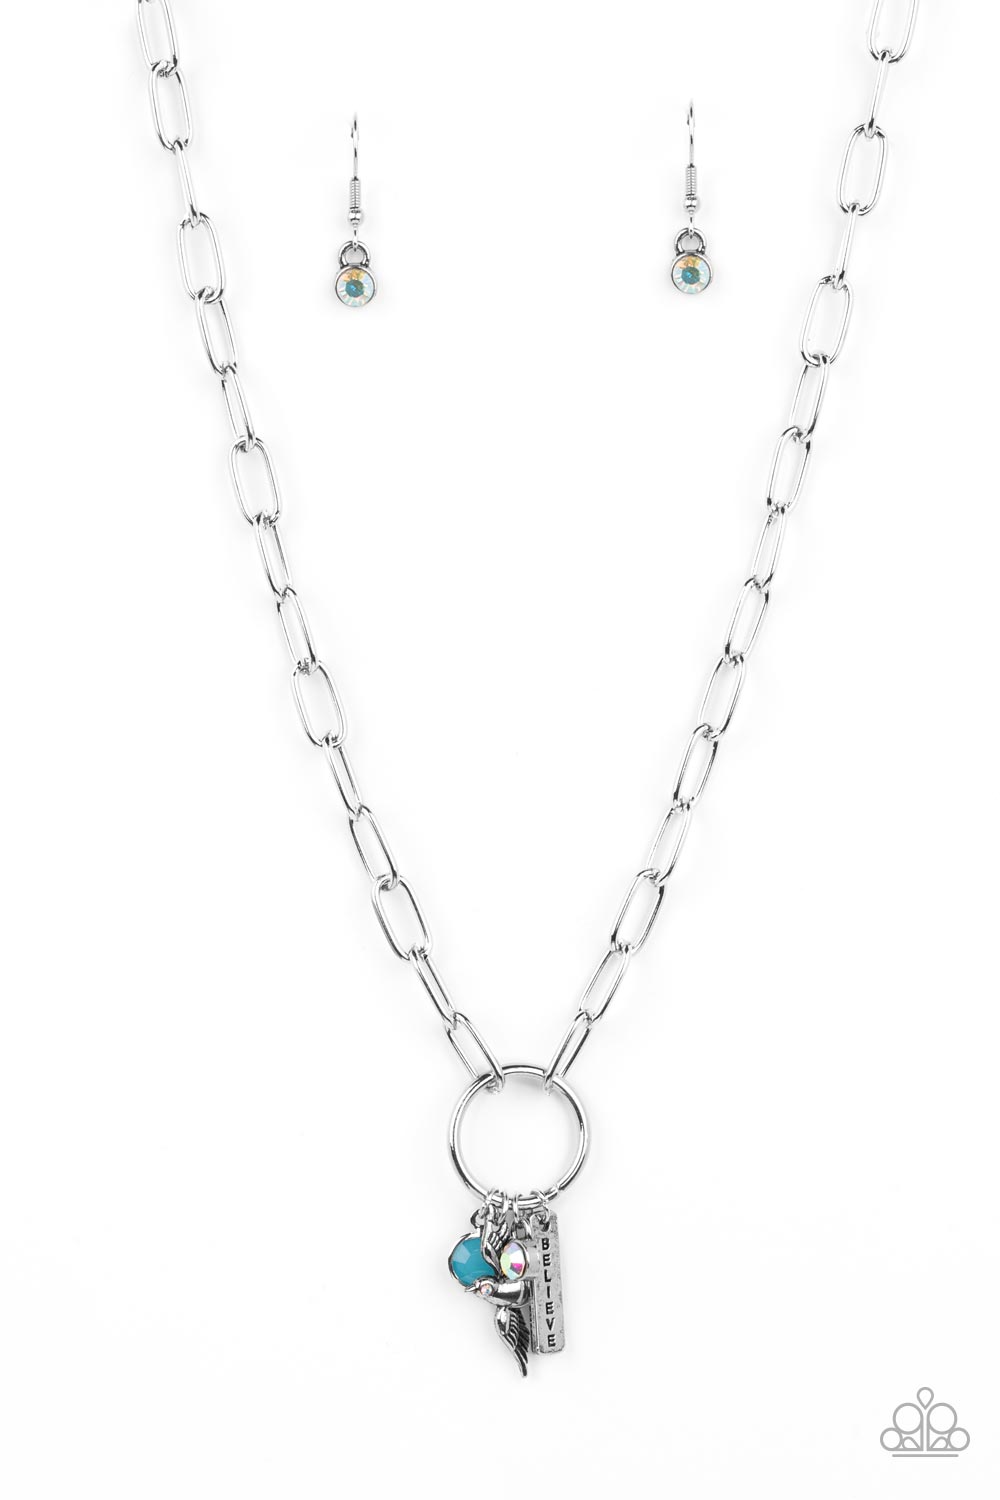 Inspired Songbird - Blue Gem & Charm Pendant Paparazzi Necklace & matching earrings